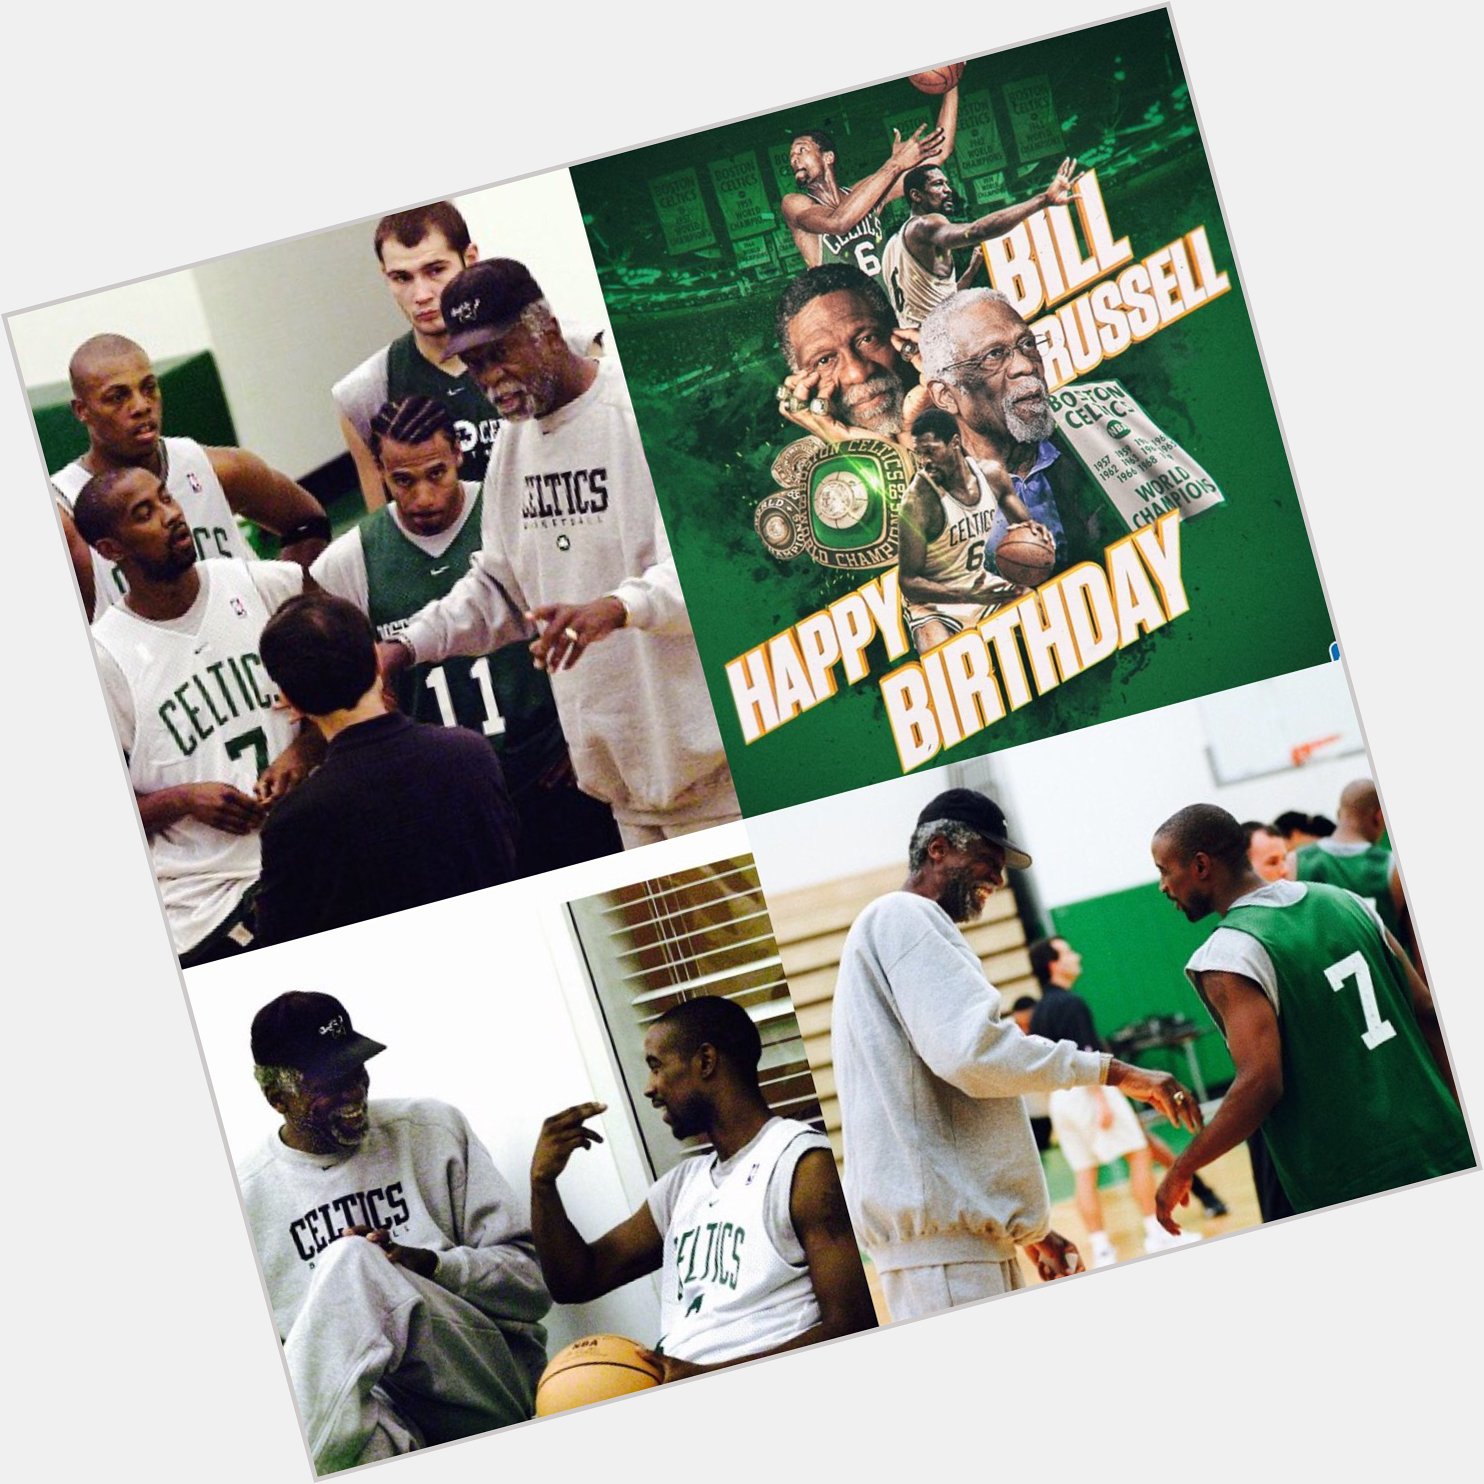 Oh yeah happy birthday to the great Bill Russell have a bless day 